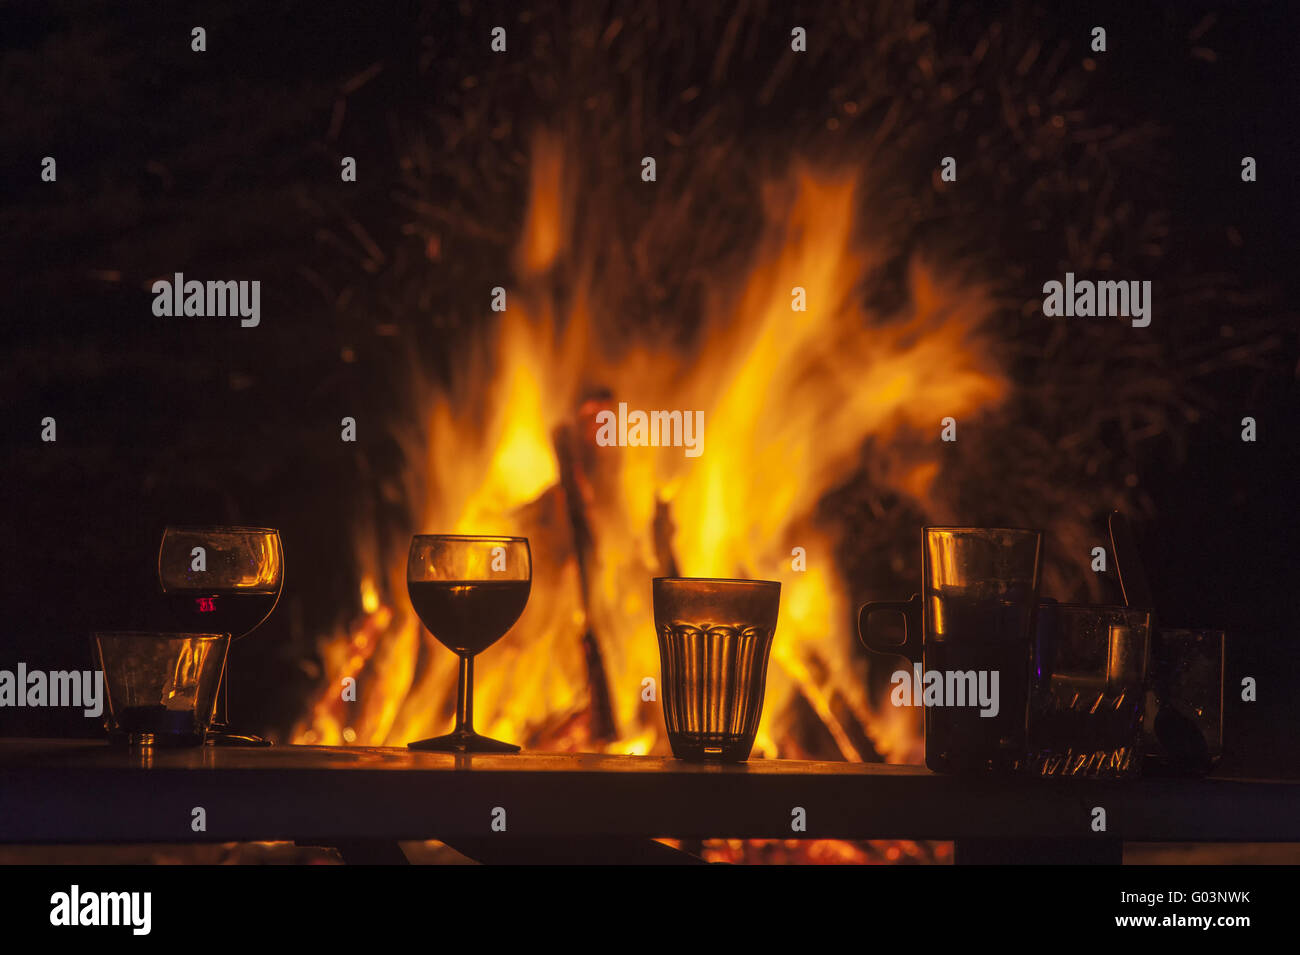 Table with glasses in front of a campfire at night Stock Photo